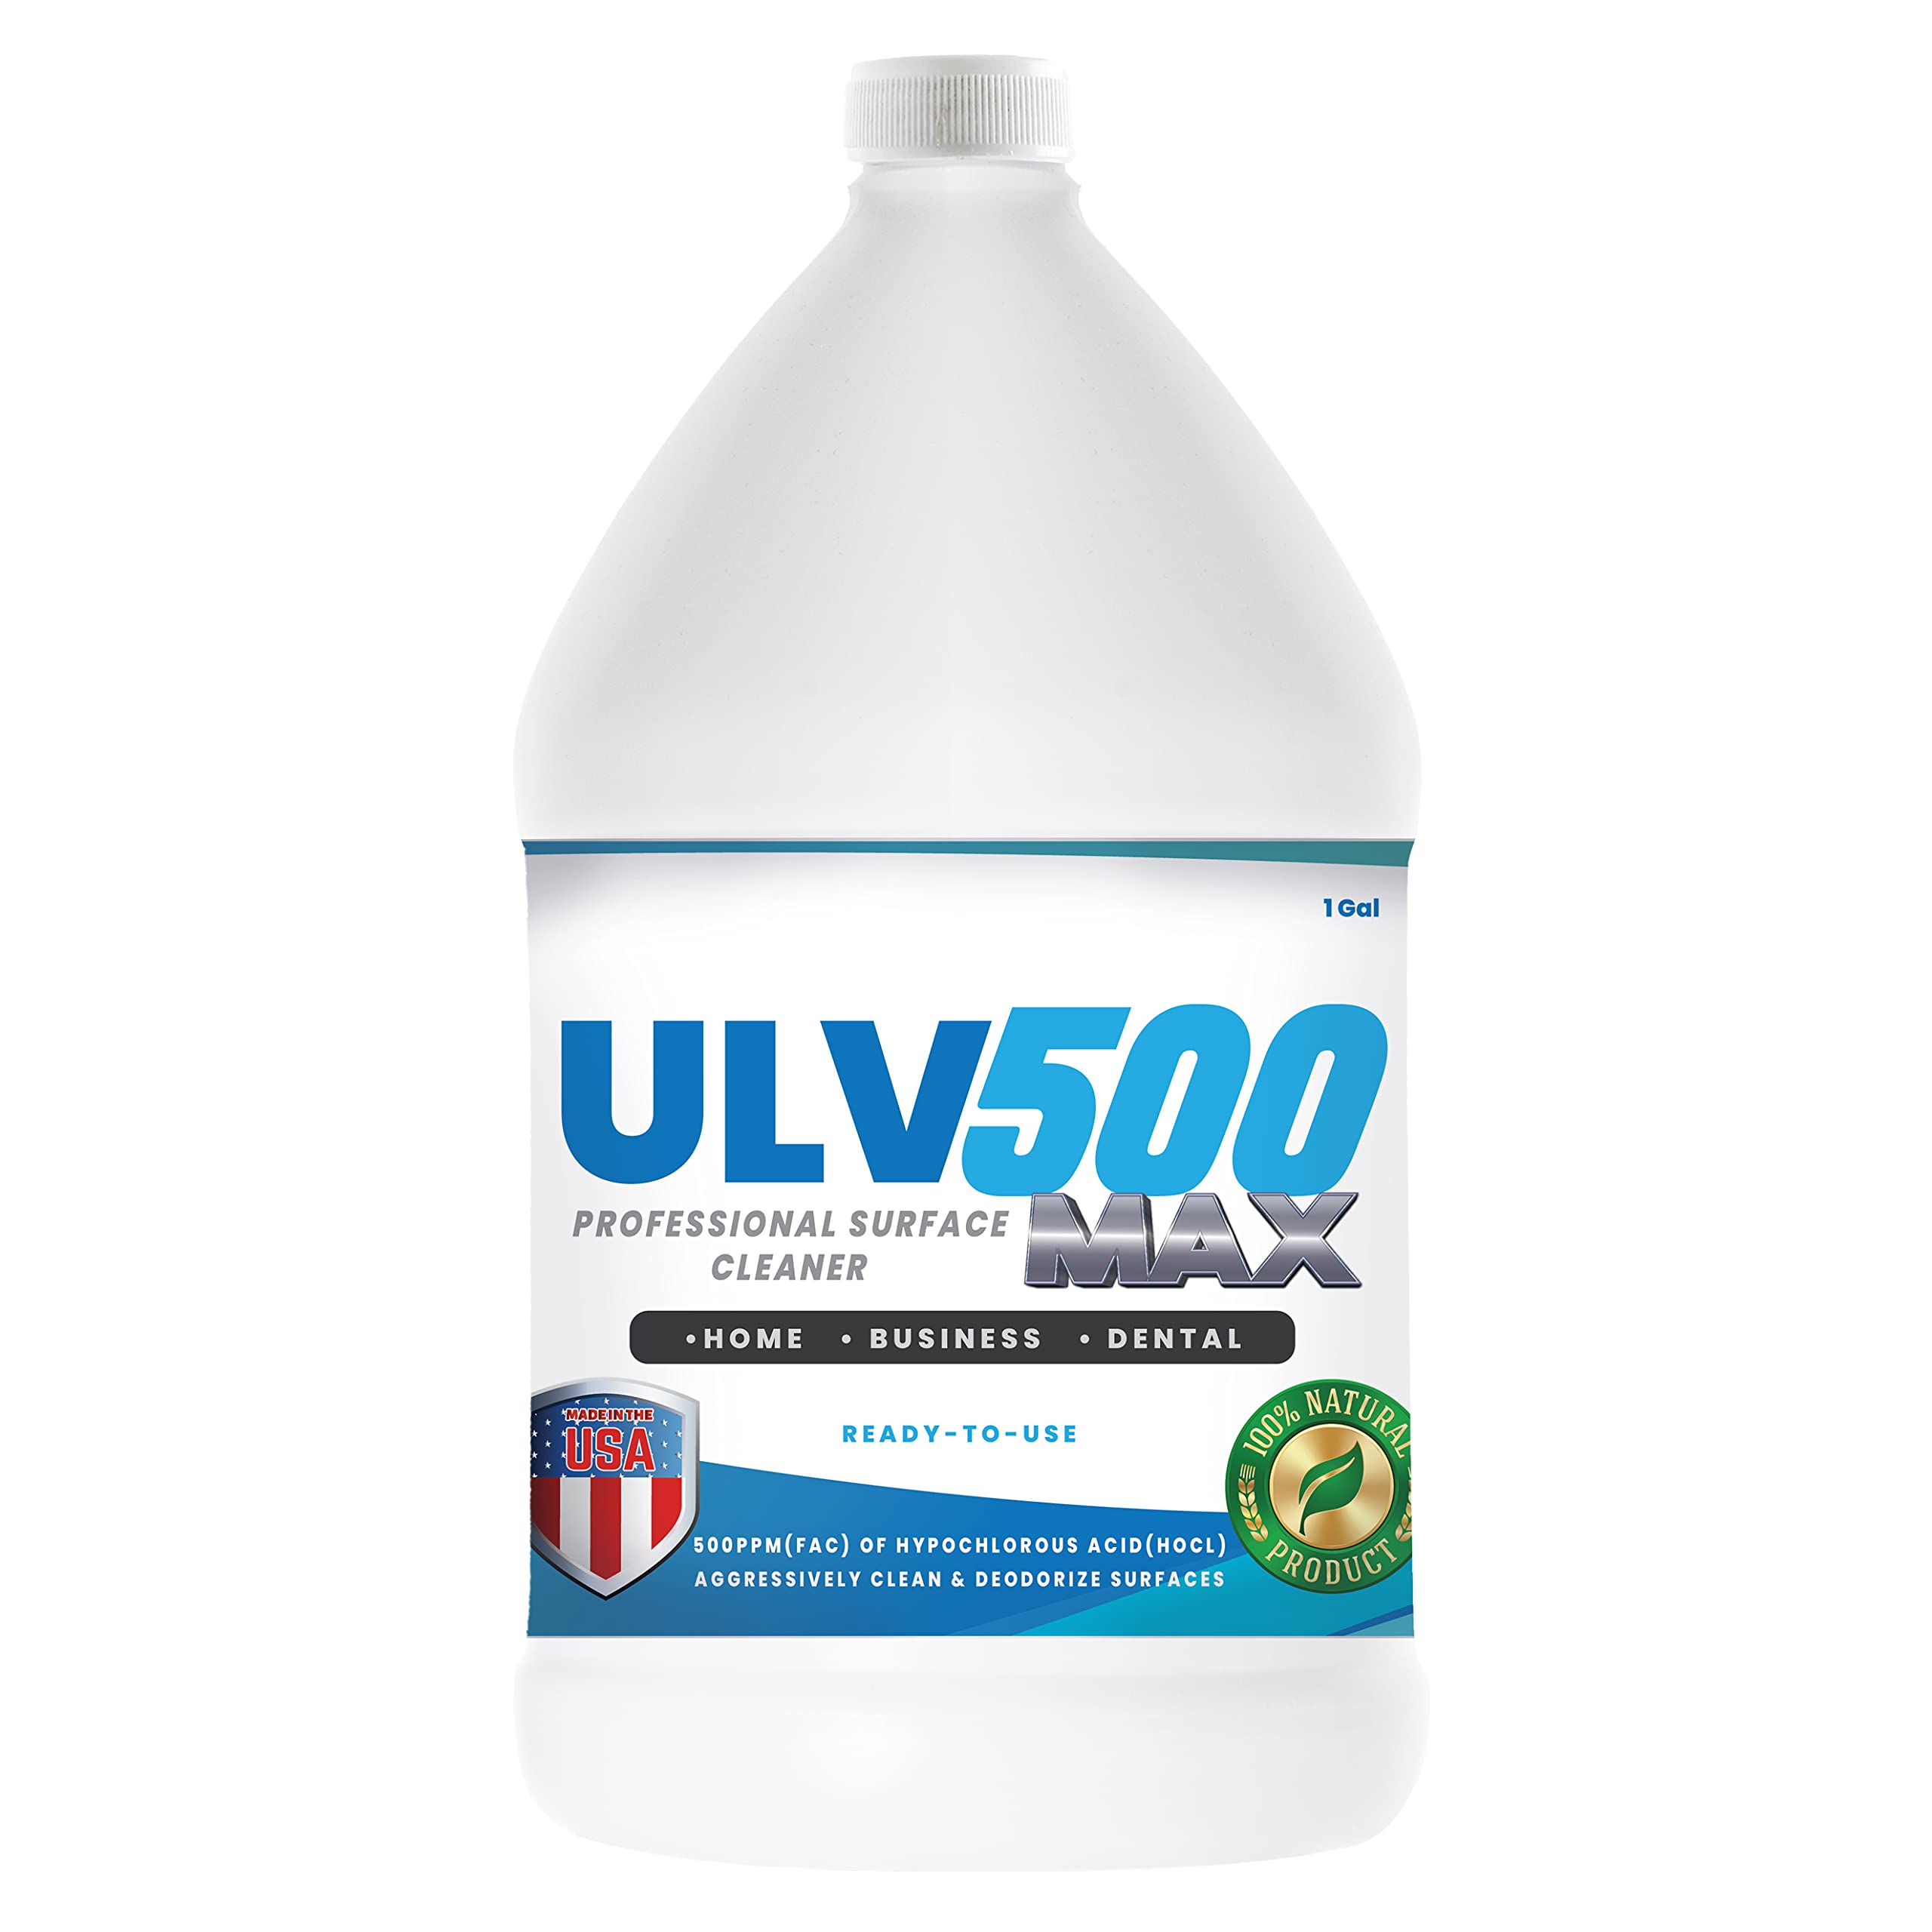 ULV500 Hypochlorous Acid 500PPM (1 Gallon) For ULV Foggers & Handheld Atomizers, For Dental And Medical Professionals, HOCL Professional Surface Cl...